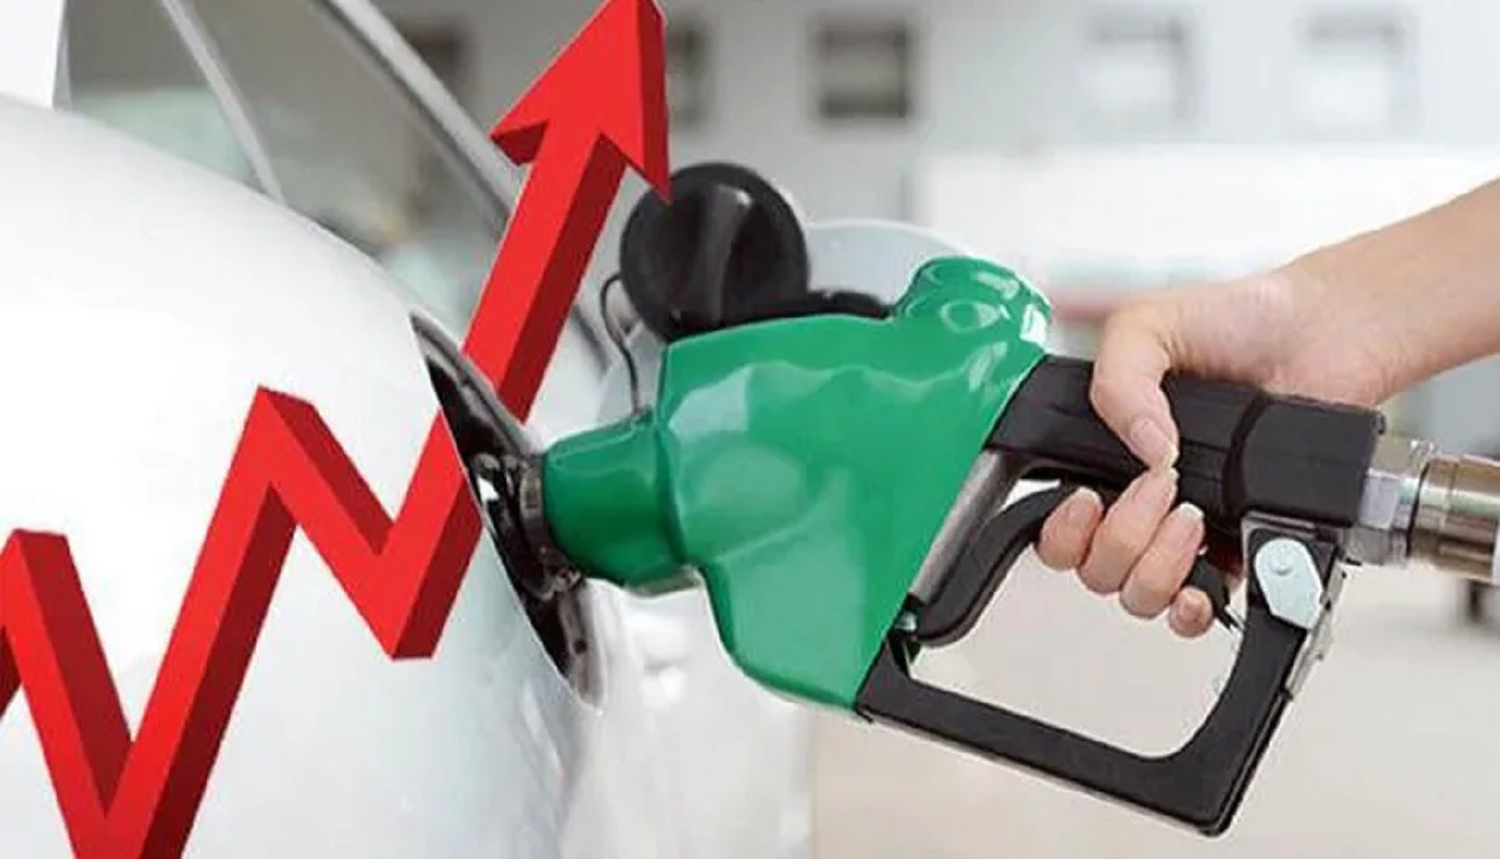 Petrol price cut: Oil marketers still sell at N170 per litre — Investigation